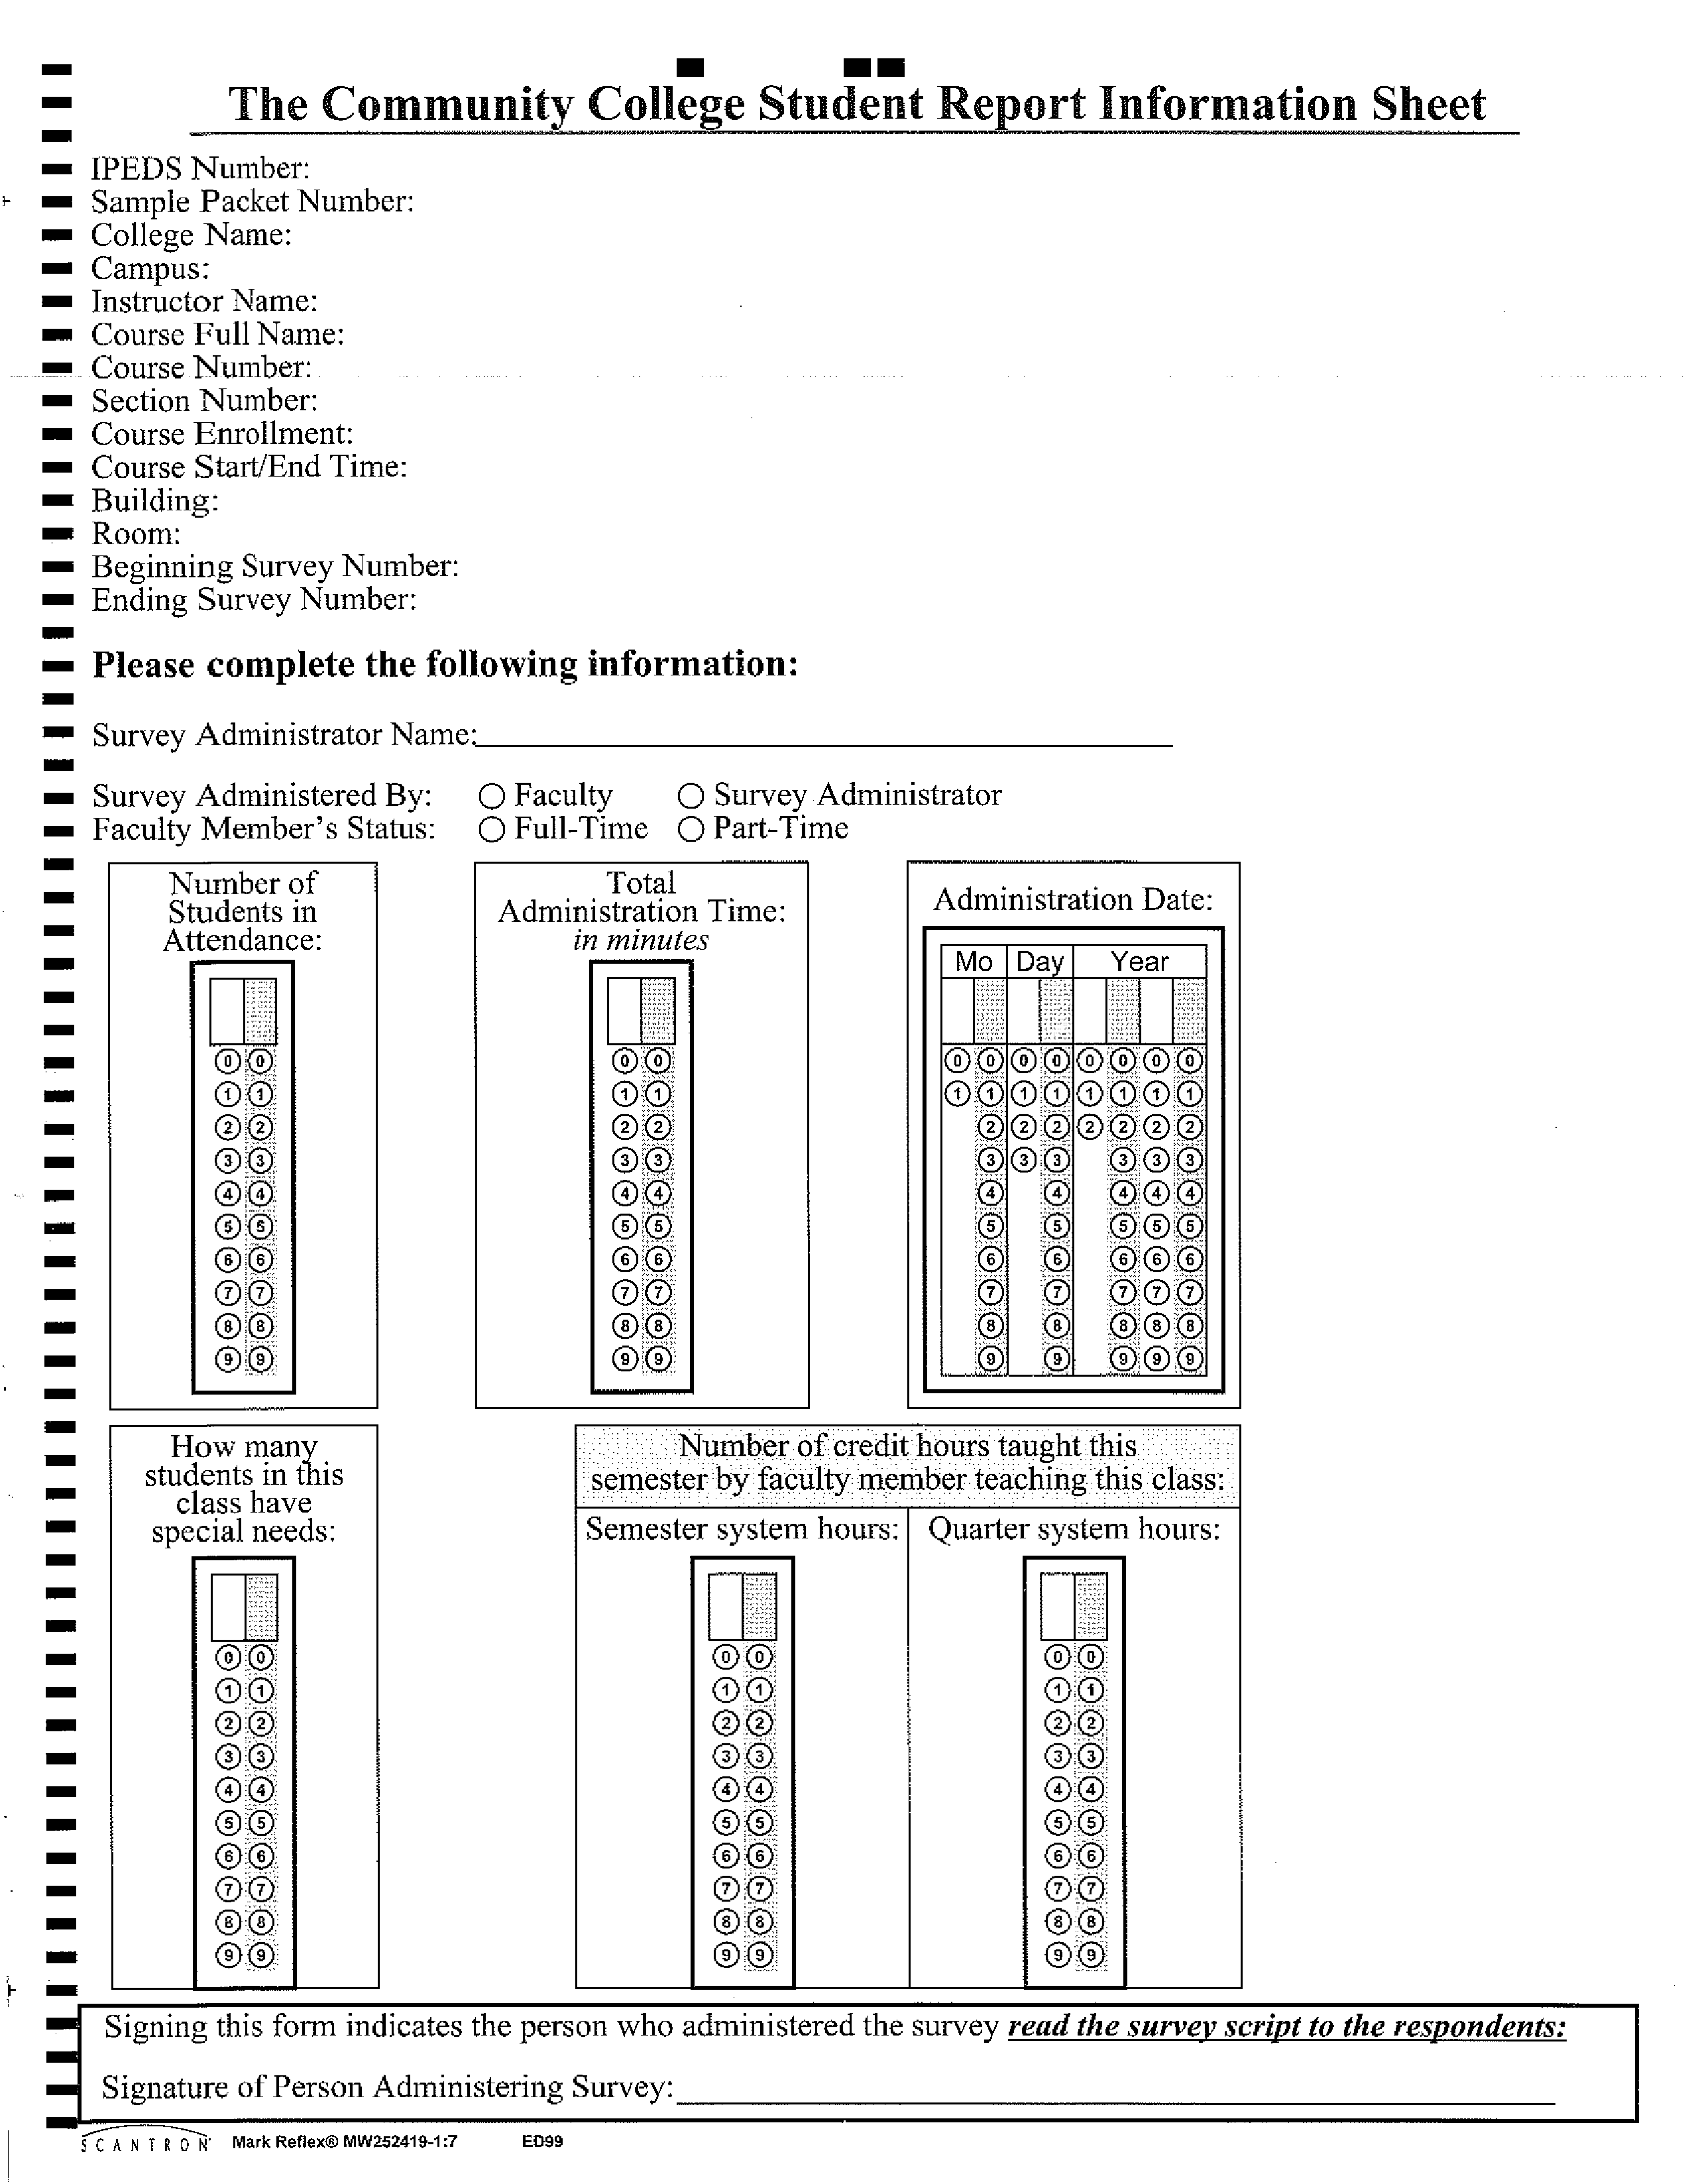 college student report information sheet template